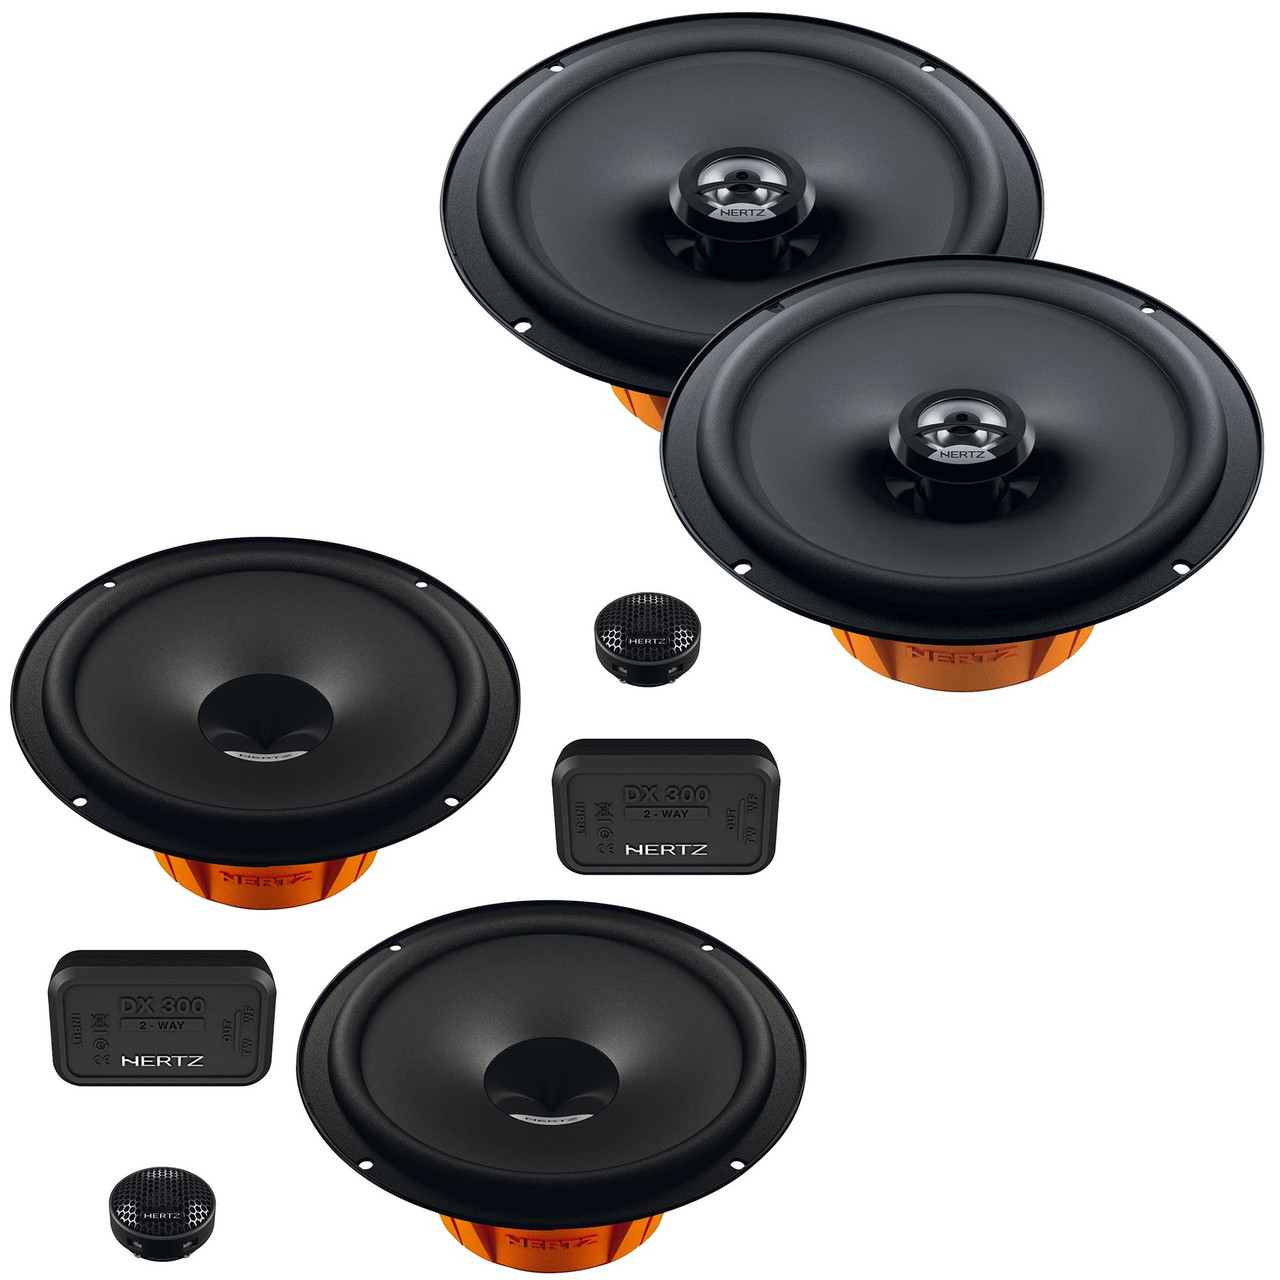 Series　up　160.3　Speakers　Two　Coaxial　with　Pair　Pair　Way　DSK　Without　HERTZ　2015　System　Component　So-　Compatible　and　DCX　165.3　Dieci　Edge　1/2　with